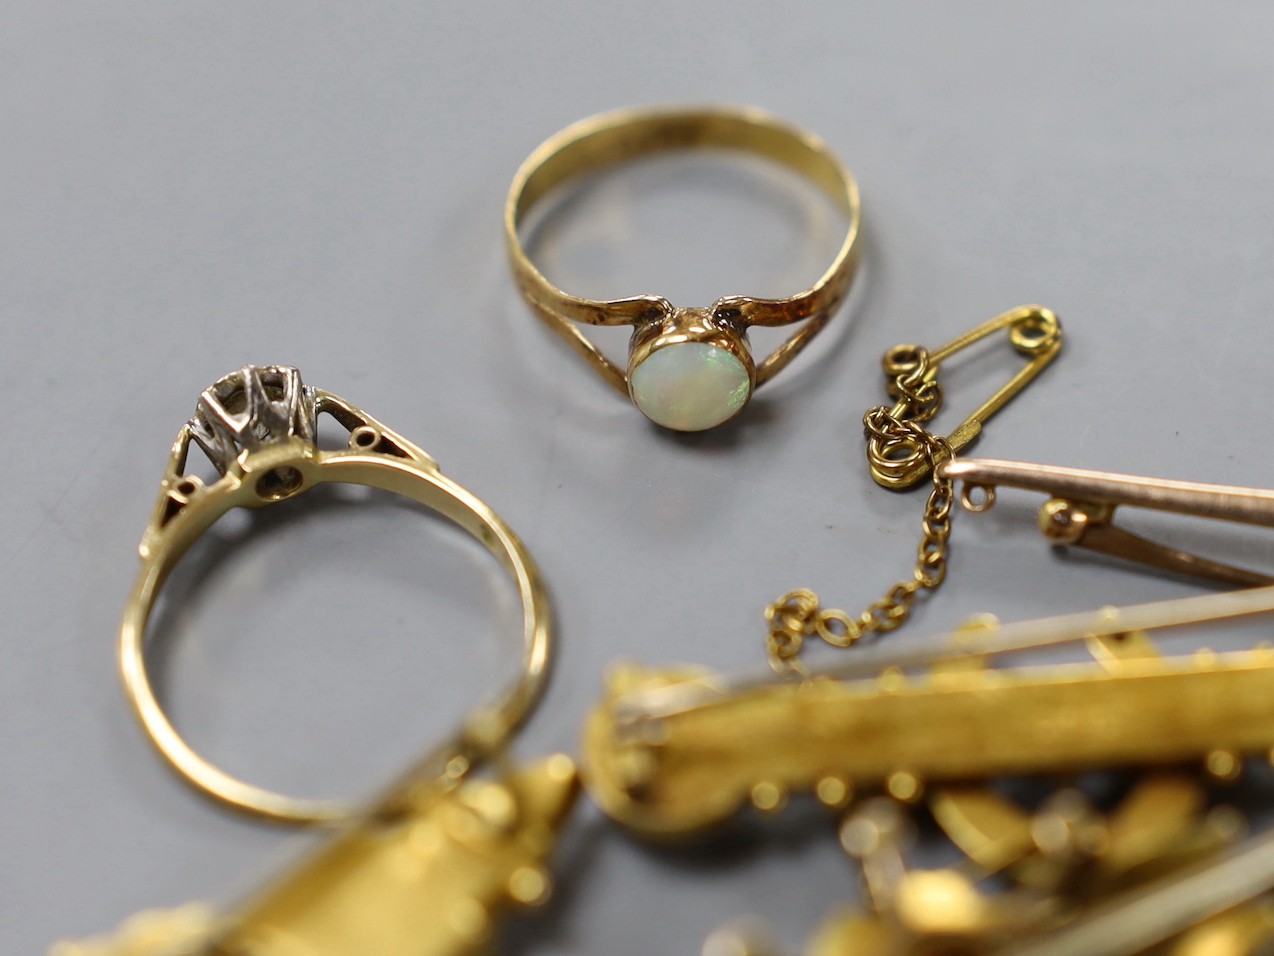 Two early 20th century 9ct and gem set bar brooches, gross weight 4.7 grams, a similar 15ct horseshoe bar brooch, gross 3.4 grams, two other yellow metal and gem set bar brooches, gross 10 grams, a 22ct gold and white op